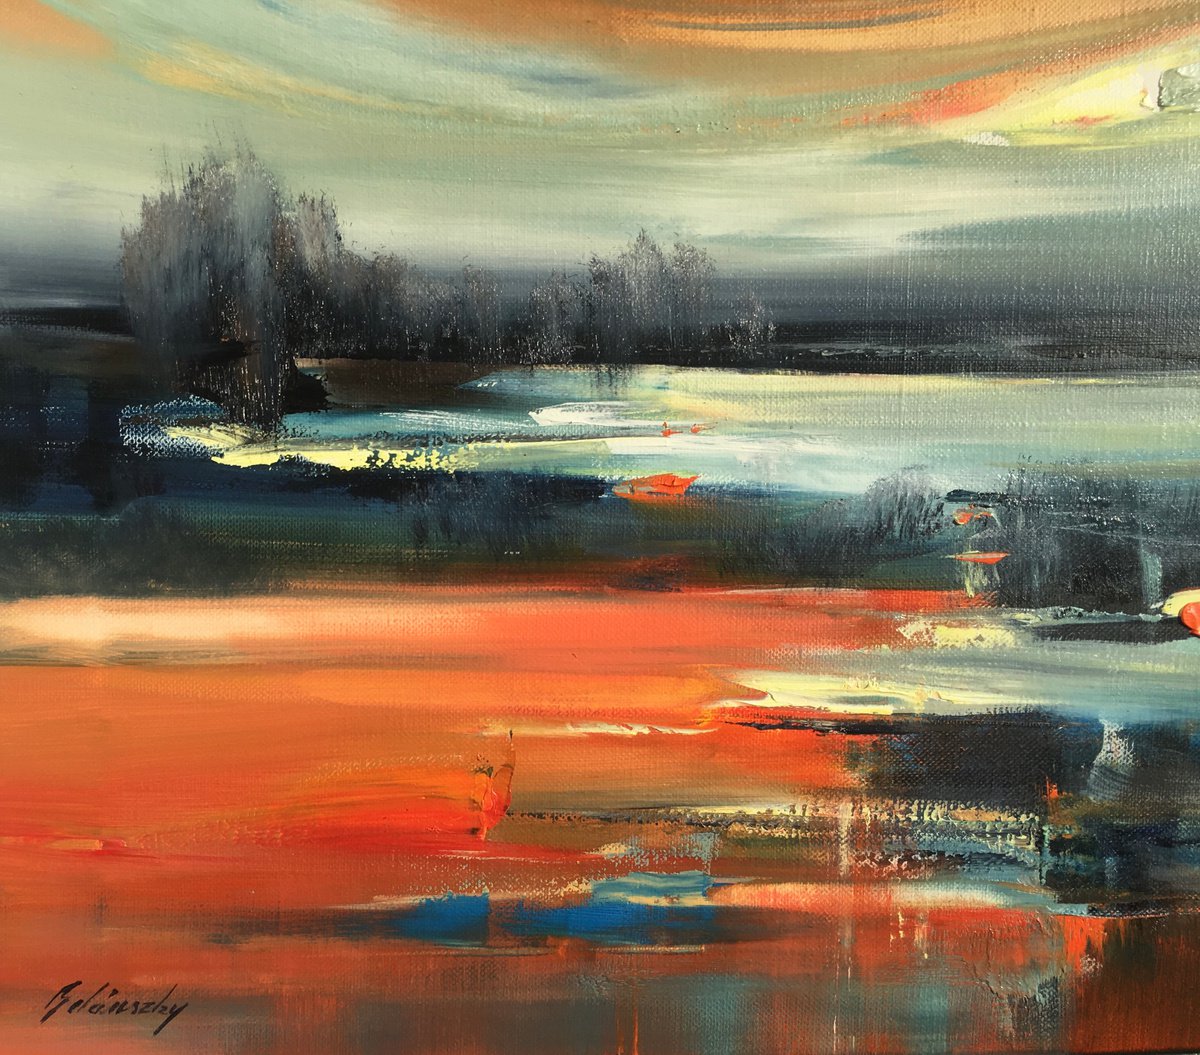 Cold Lake - 60 x 60 cm abstract landscape oil painting in blue and red